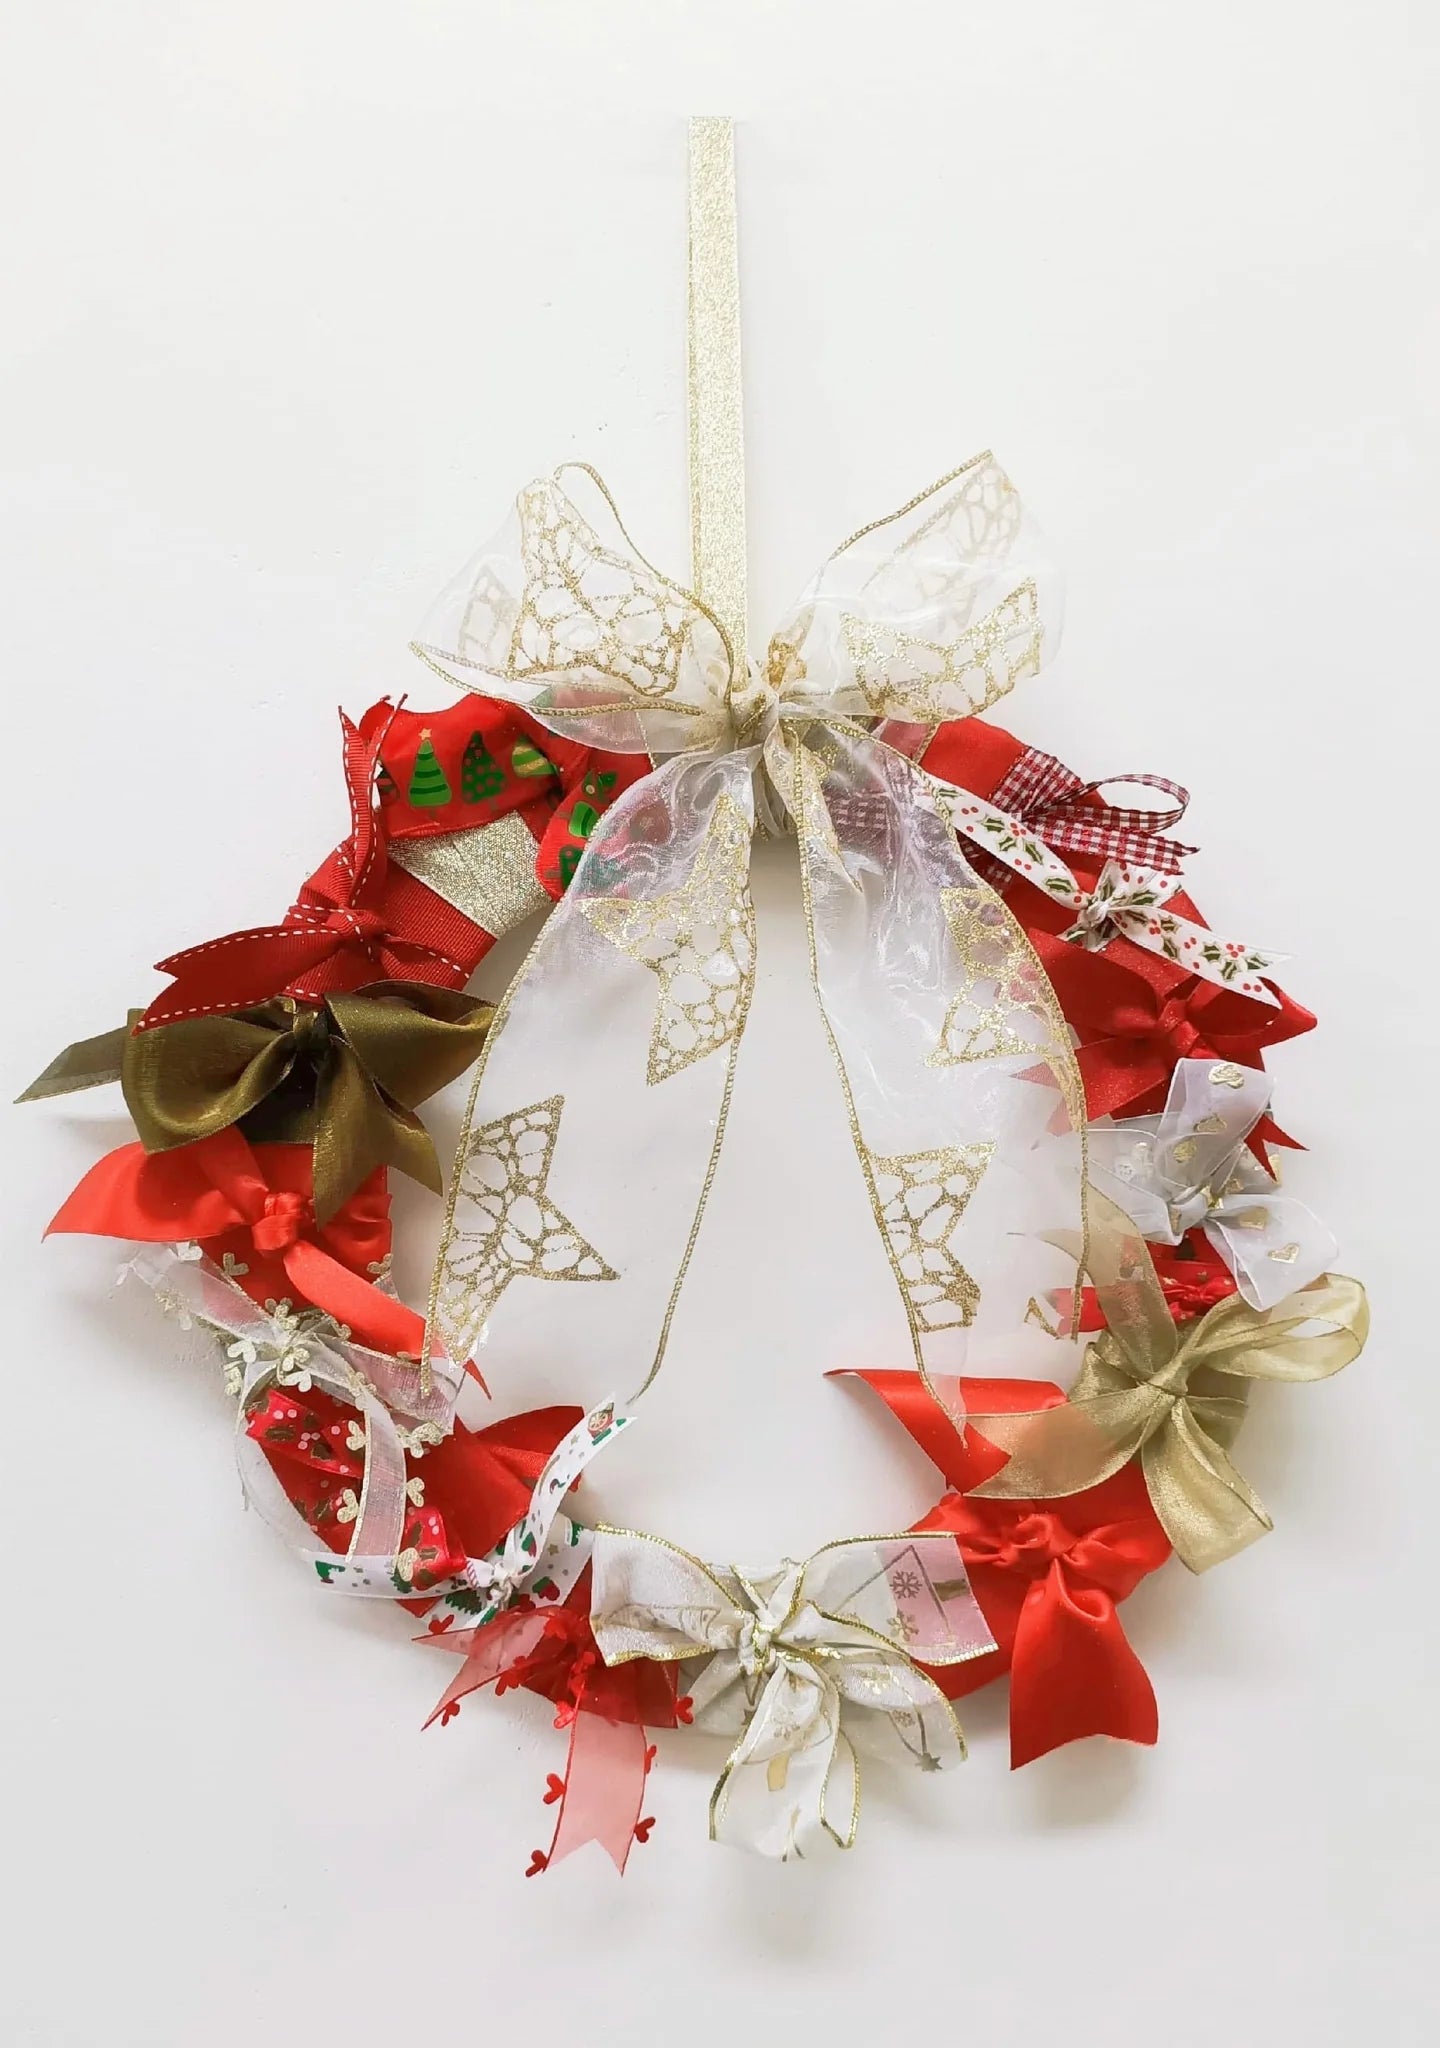 DIY Craft Ribbon Decorations with your Family